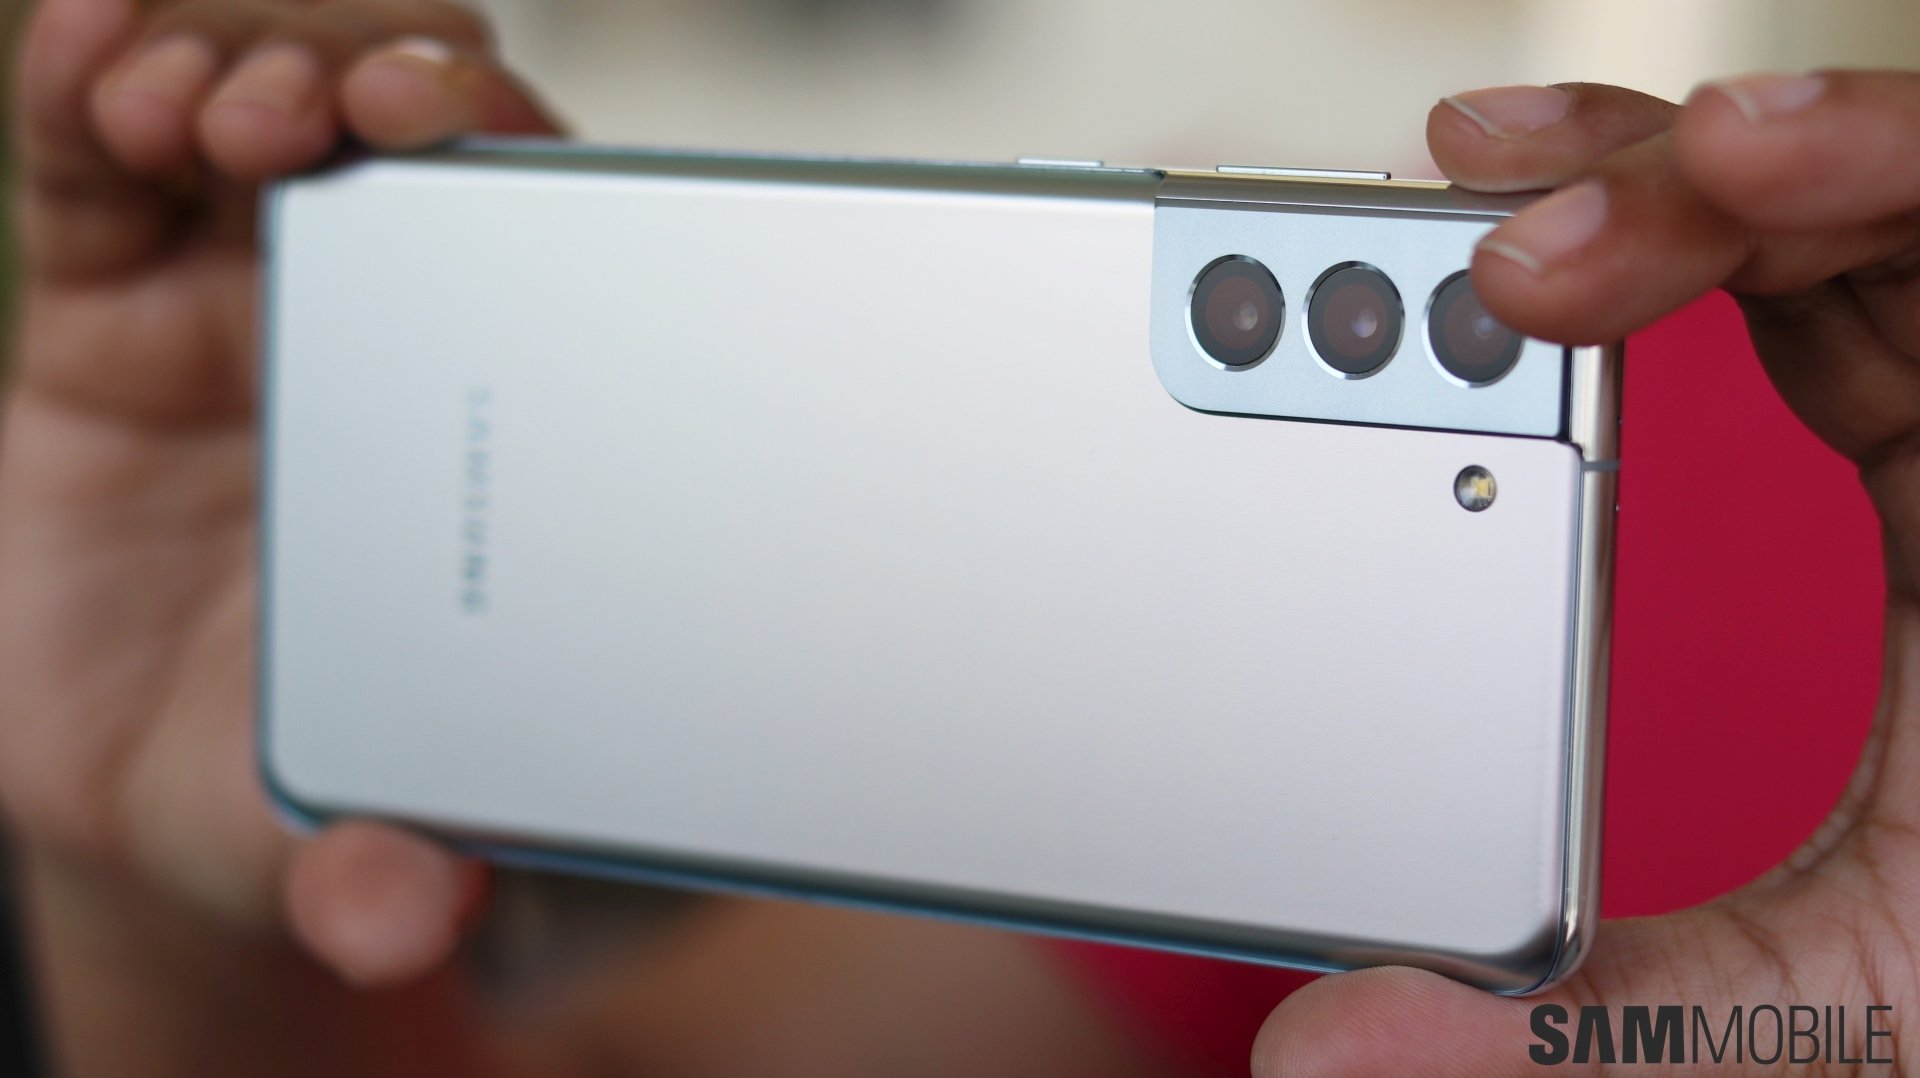 The Google Pixel 6 Pro price may give Samsung sleepless nights - SamMobile